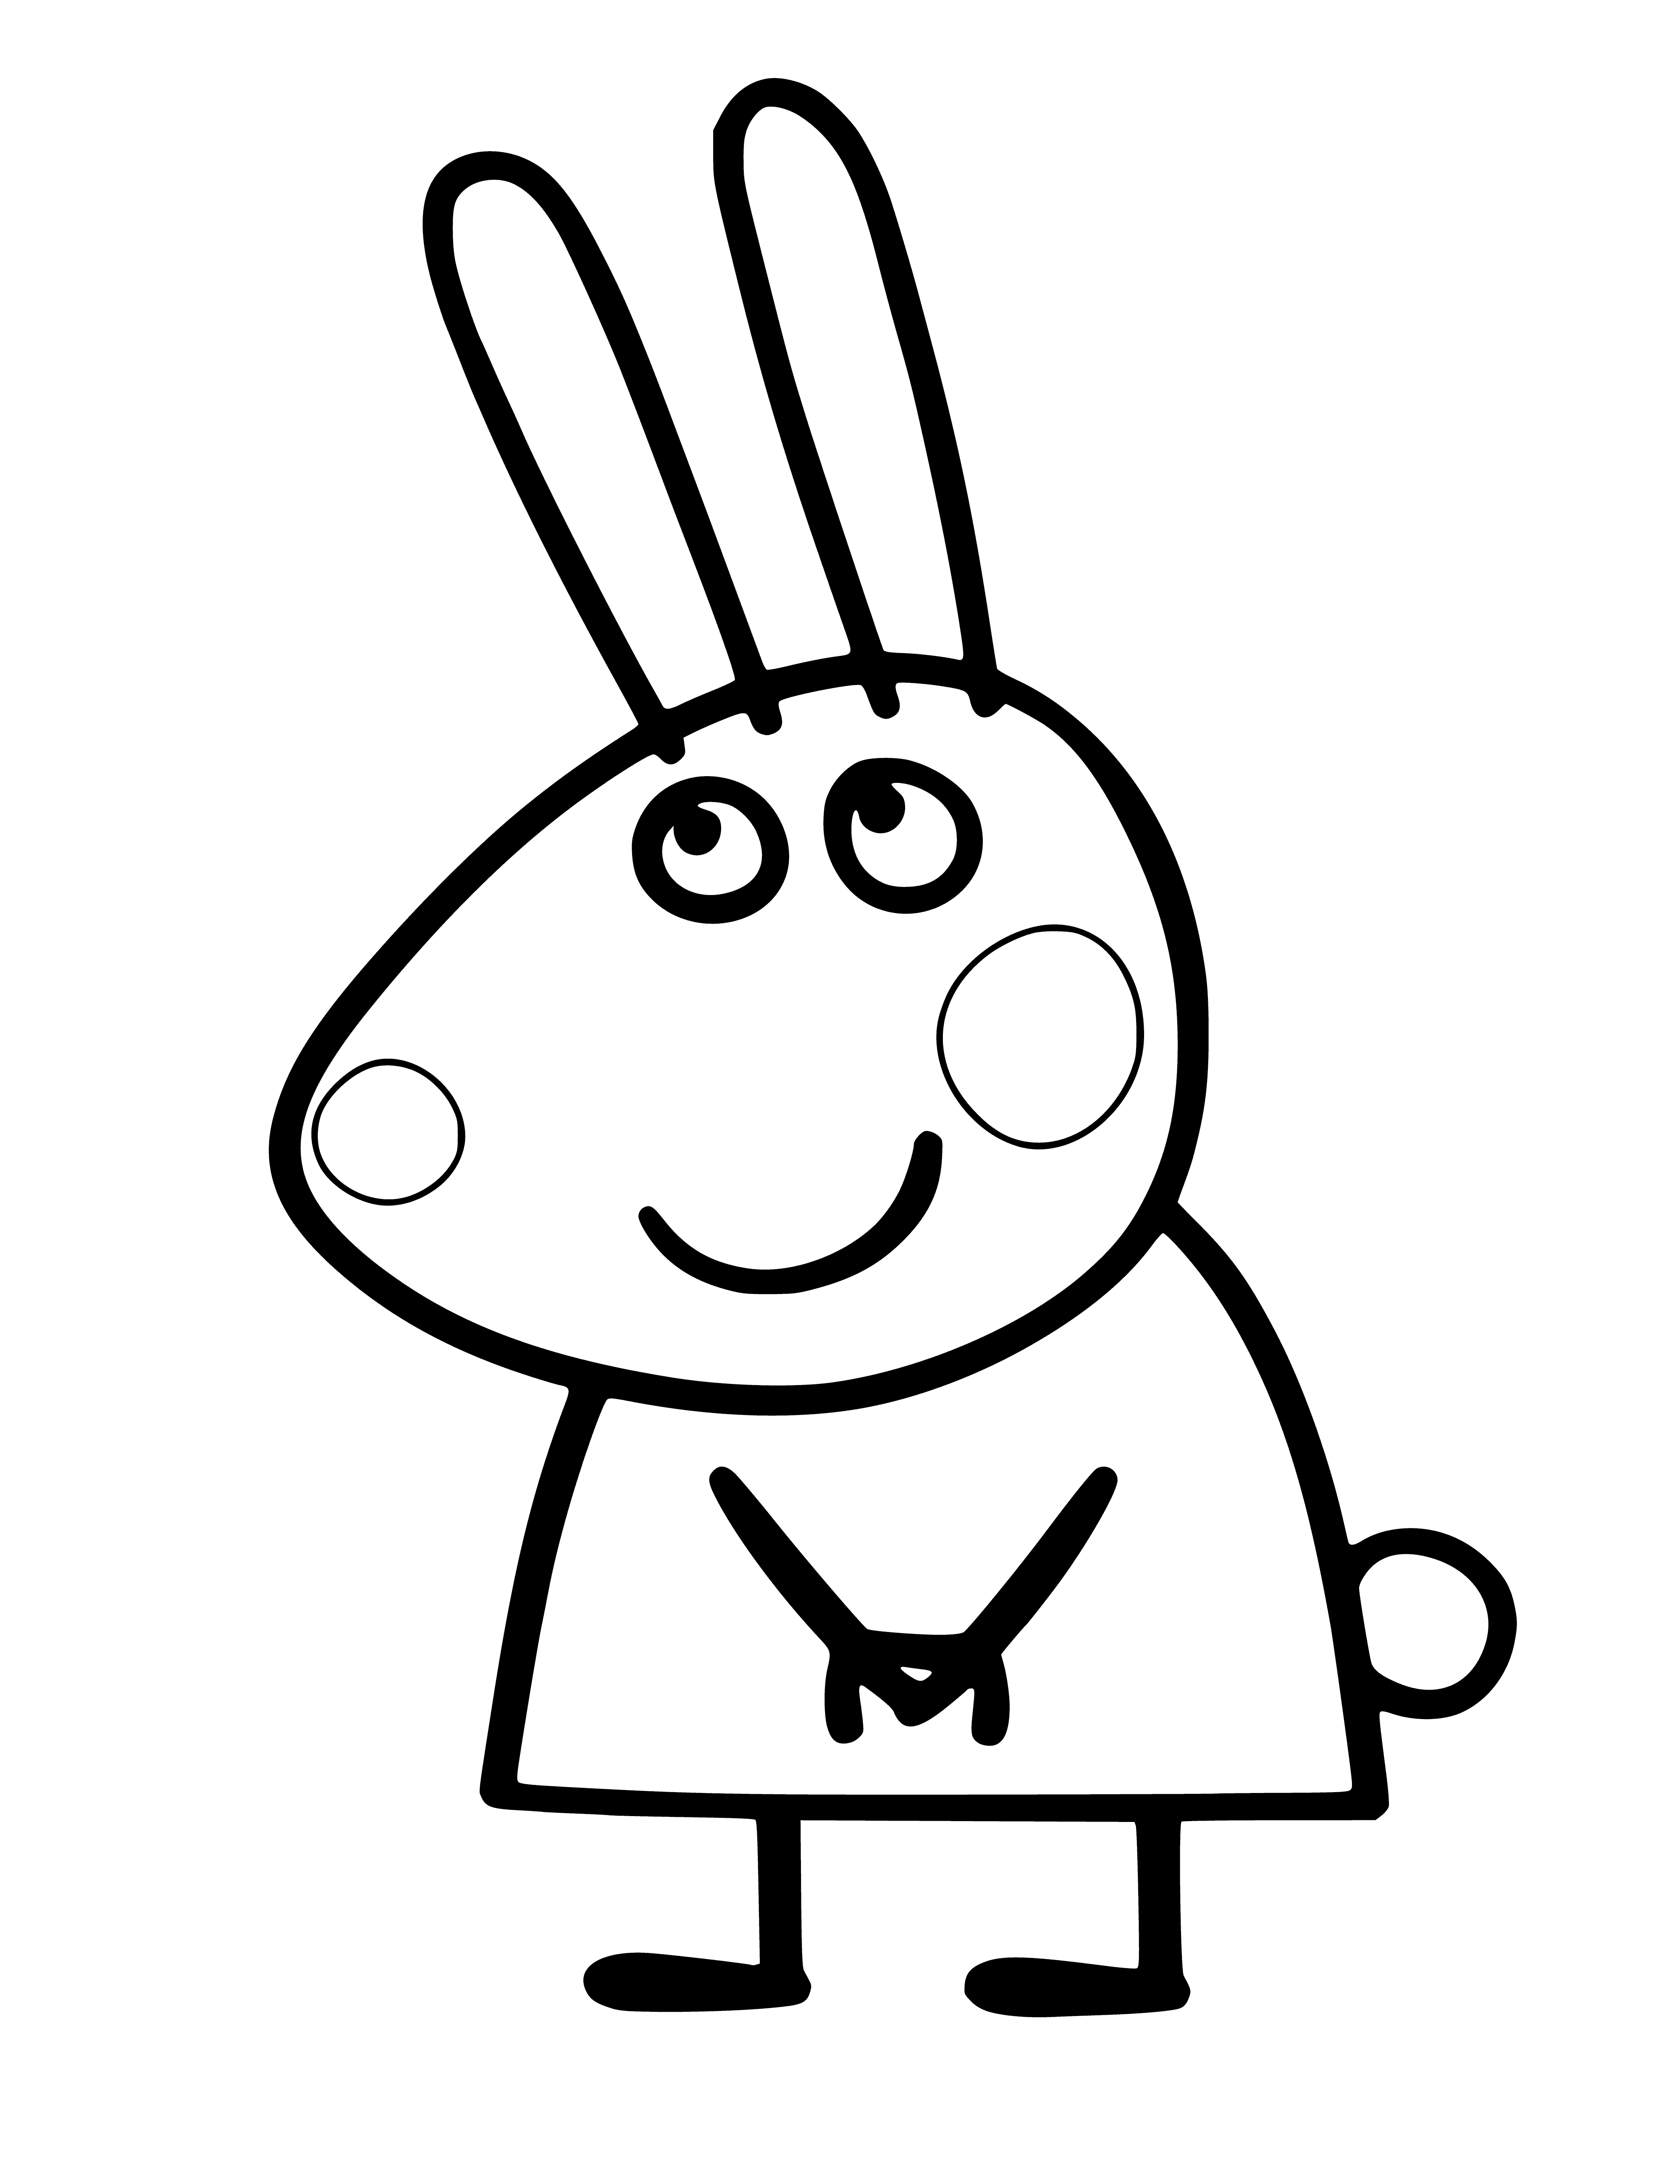 coloring page: Girl in blue dress holds carrot while white-spotted rabbit on ground gazes up at her.